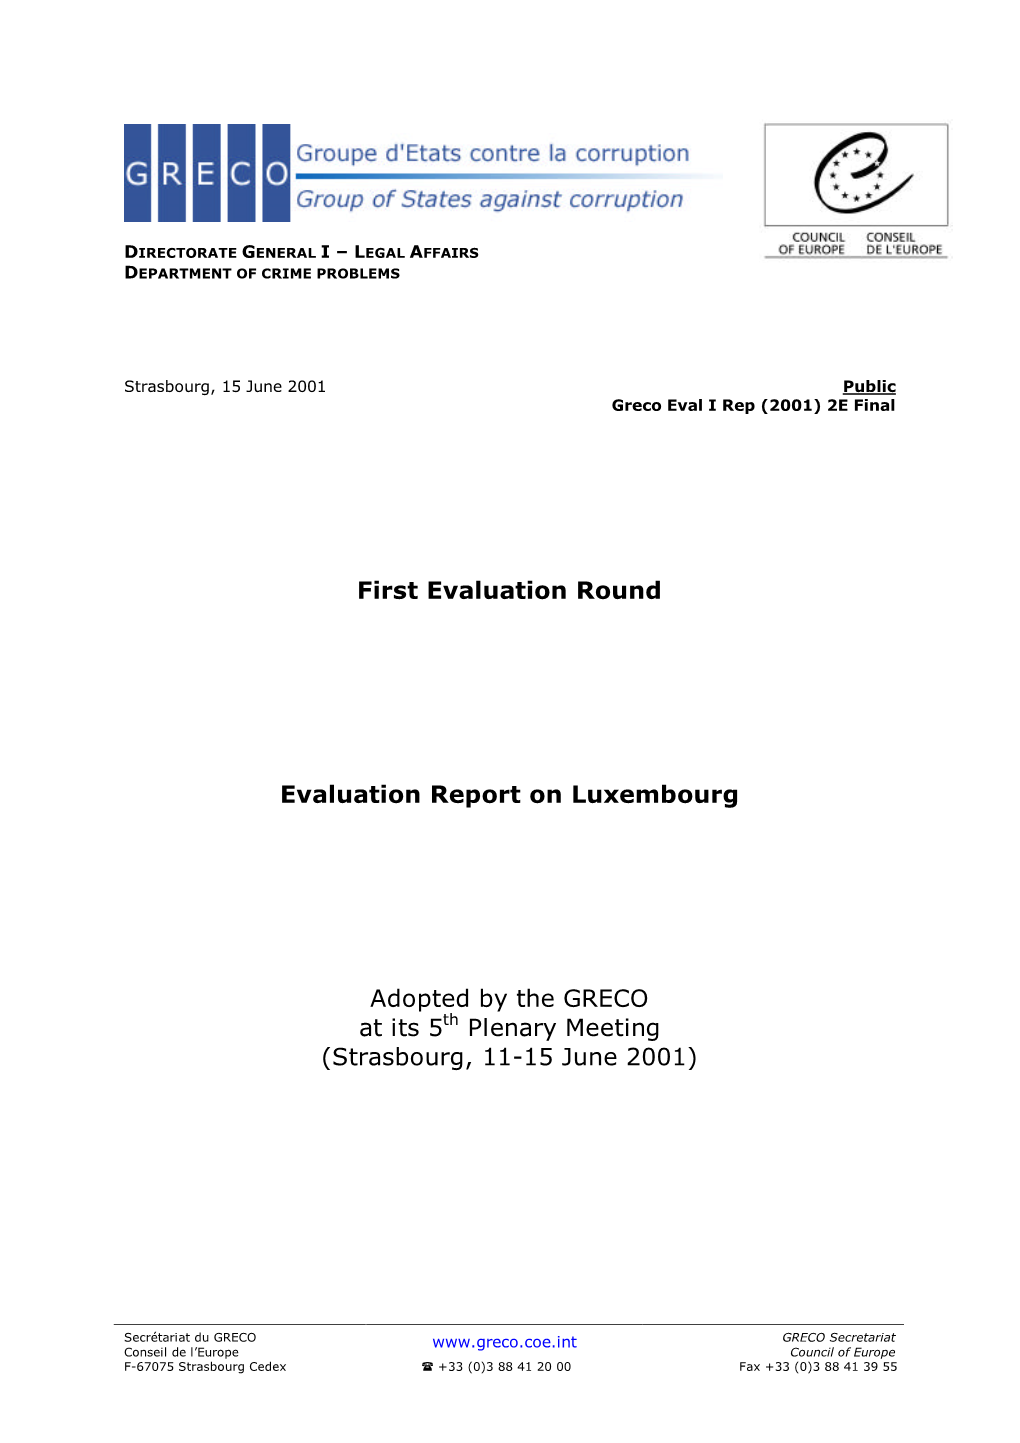 Evaluation Report on Luxembourg, Adopted by GRECO, 5Th Plenary